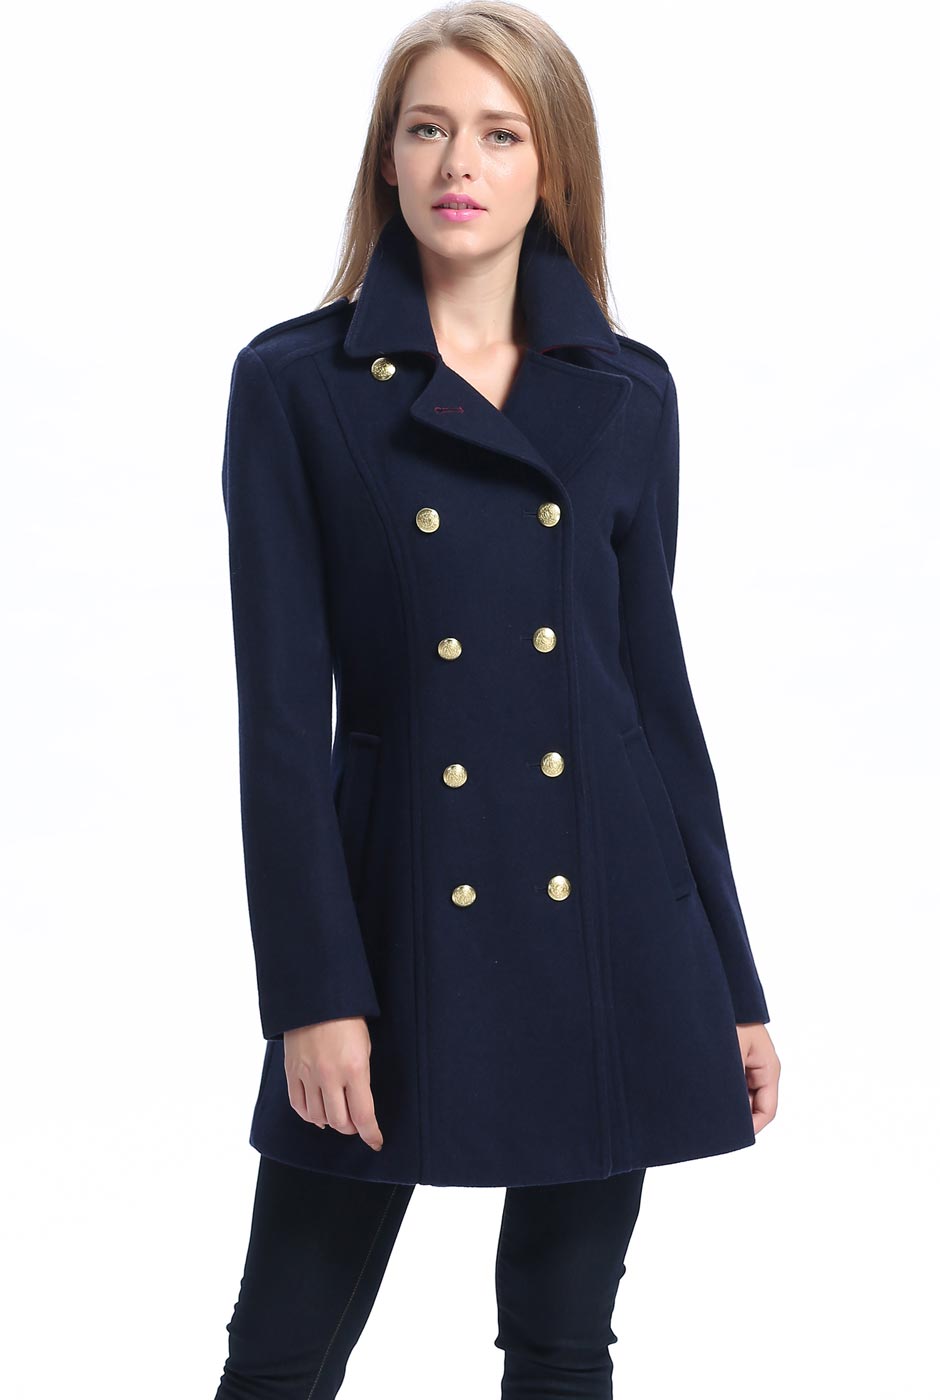 BGSD Women Victoria Wool Fitted Military Melton Coat